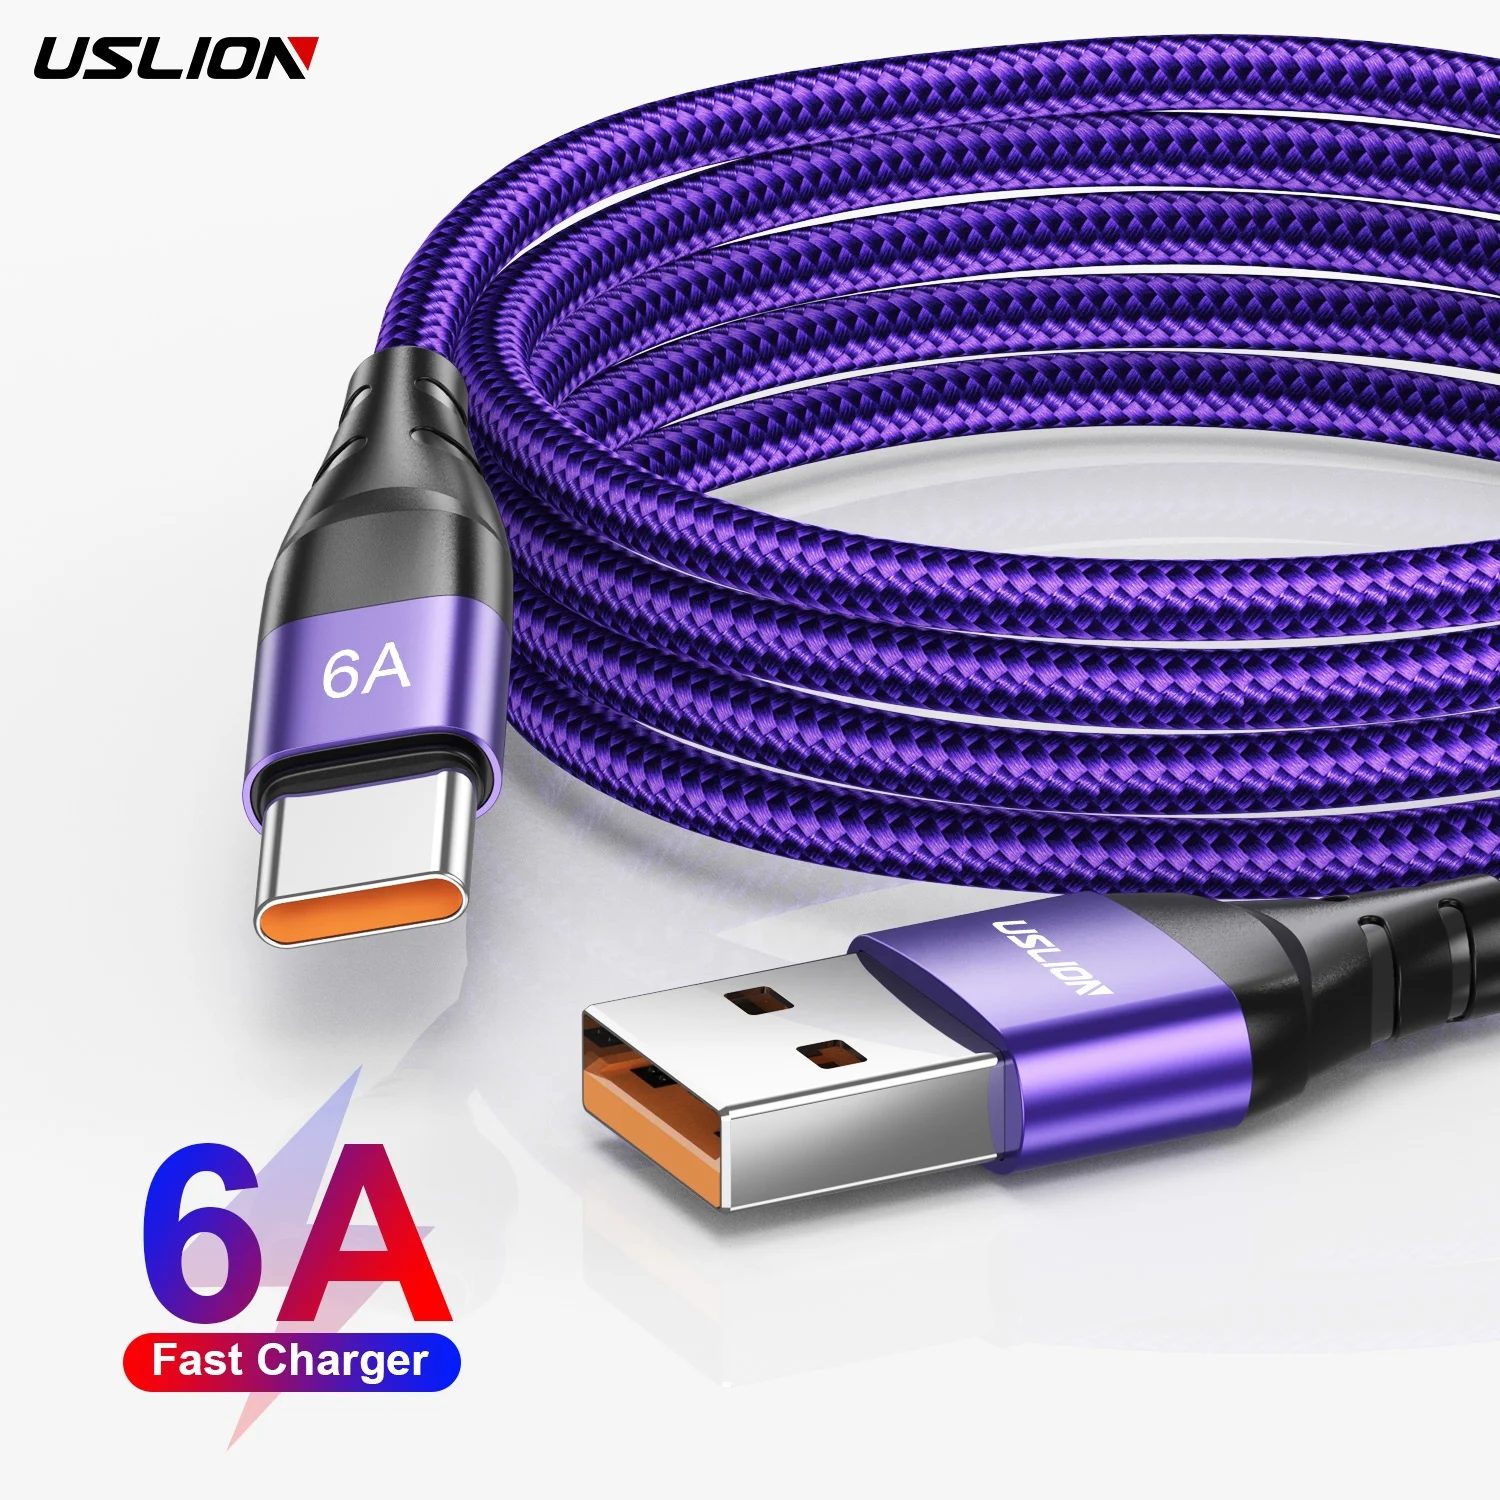 

USLION 2 Meter 6A 66W USB Type C Cable Charger Mobile Phone Fast Charge 5A 3A USB Cable Type C Data Cables Micro USB for Huawei, Black,red,purple